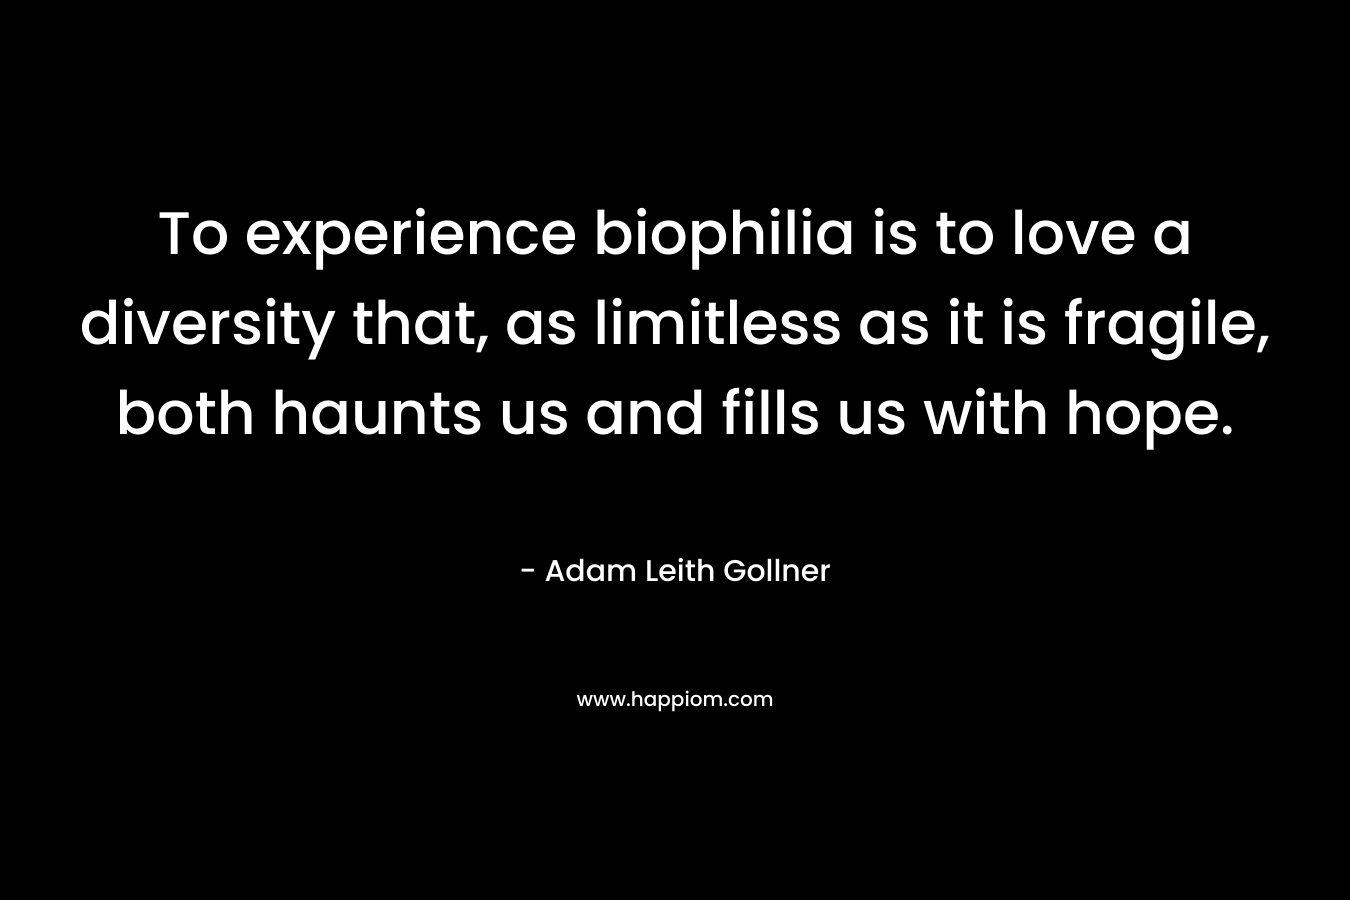 To experience biophilia is to love a diversity that, as limitless as it is fragile, both haunts us and fills us with hope.  – Adam Leith Gollner